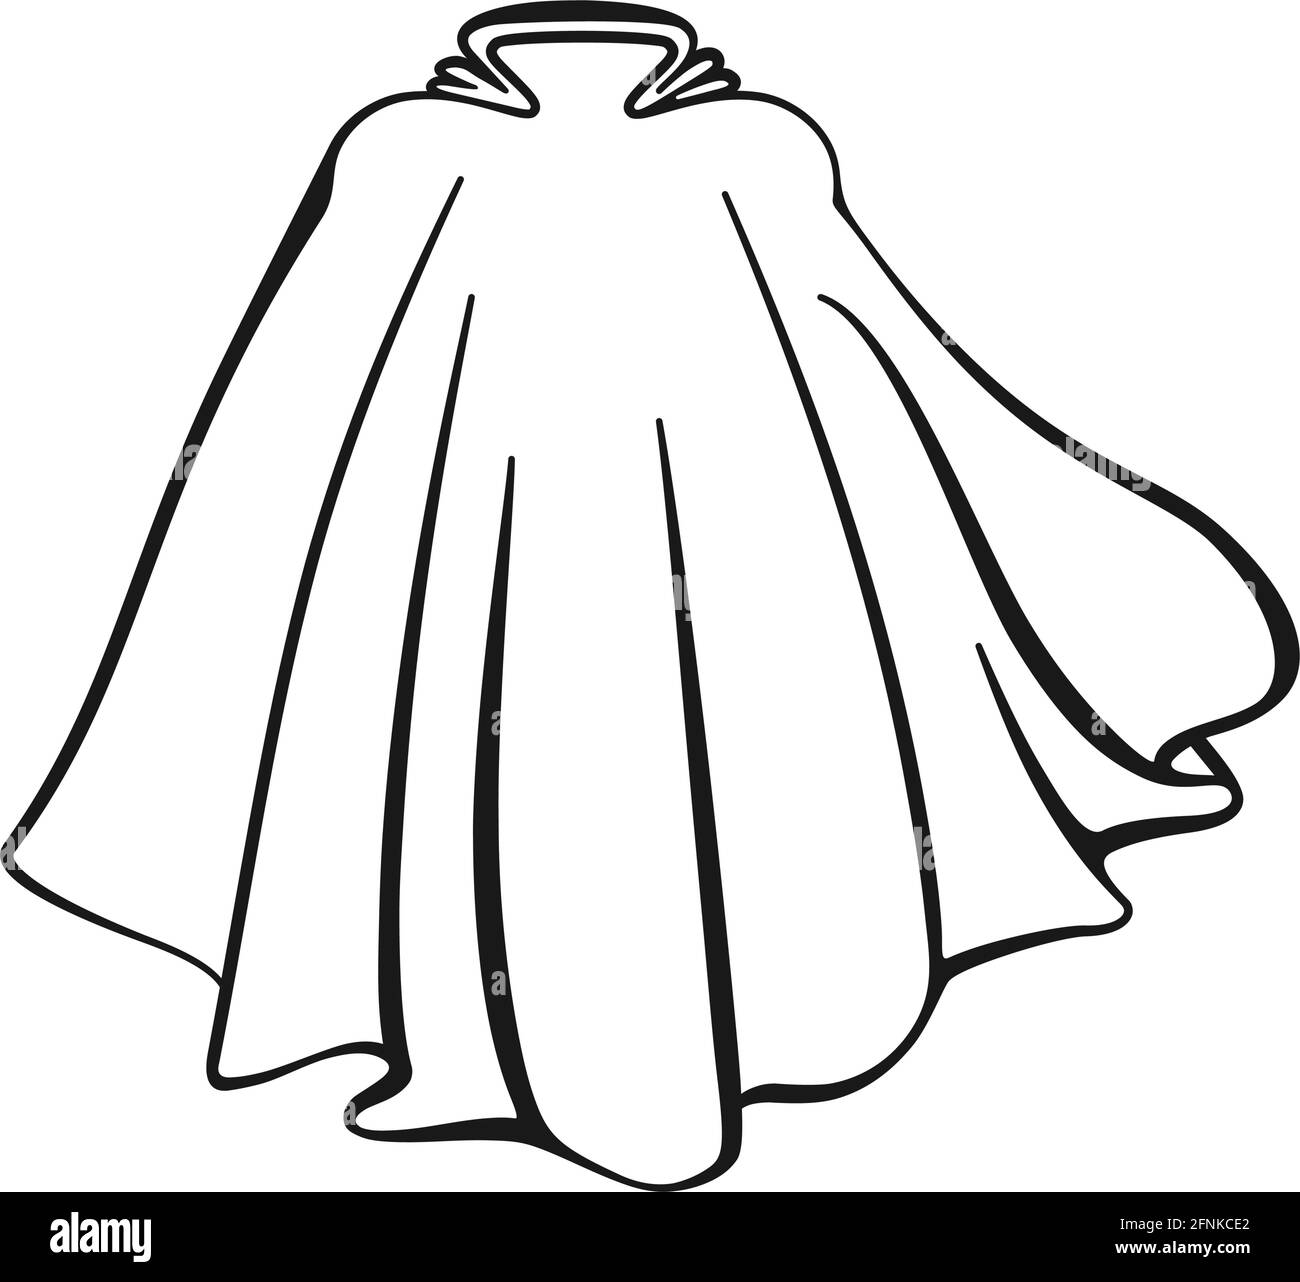 Super hero cape black and white stock photos images